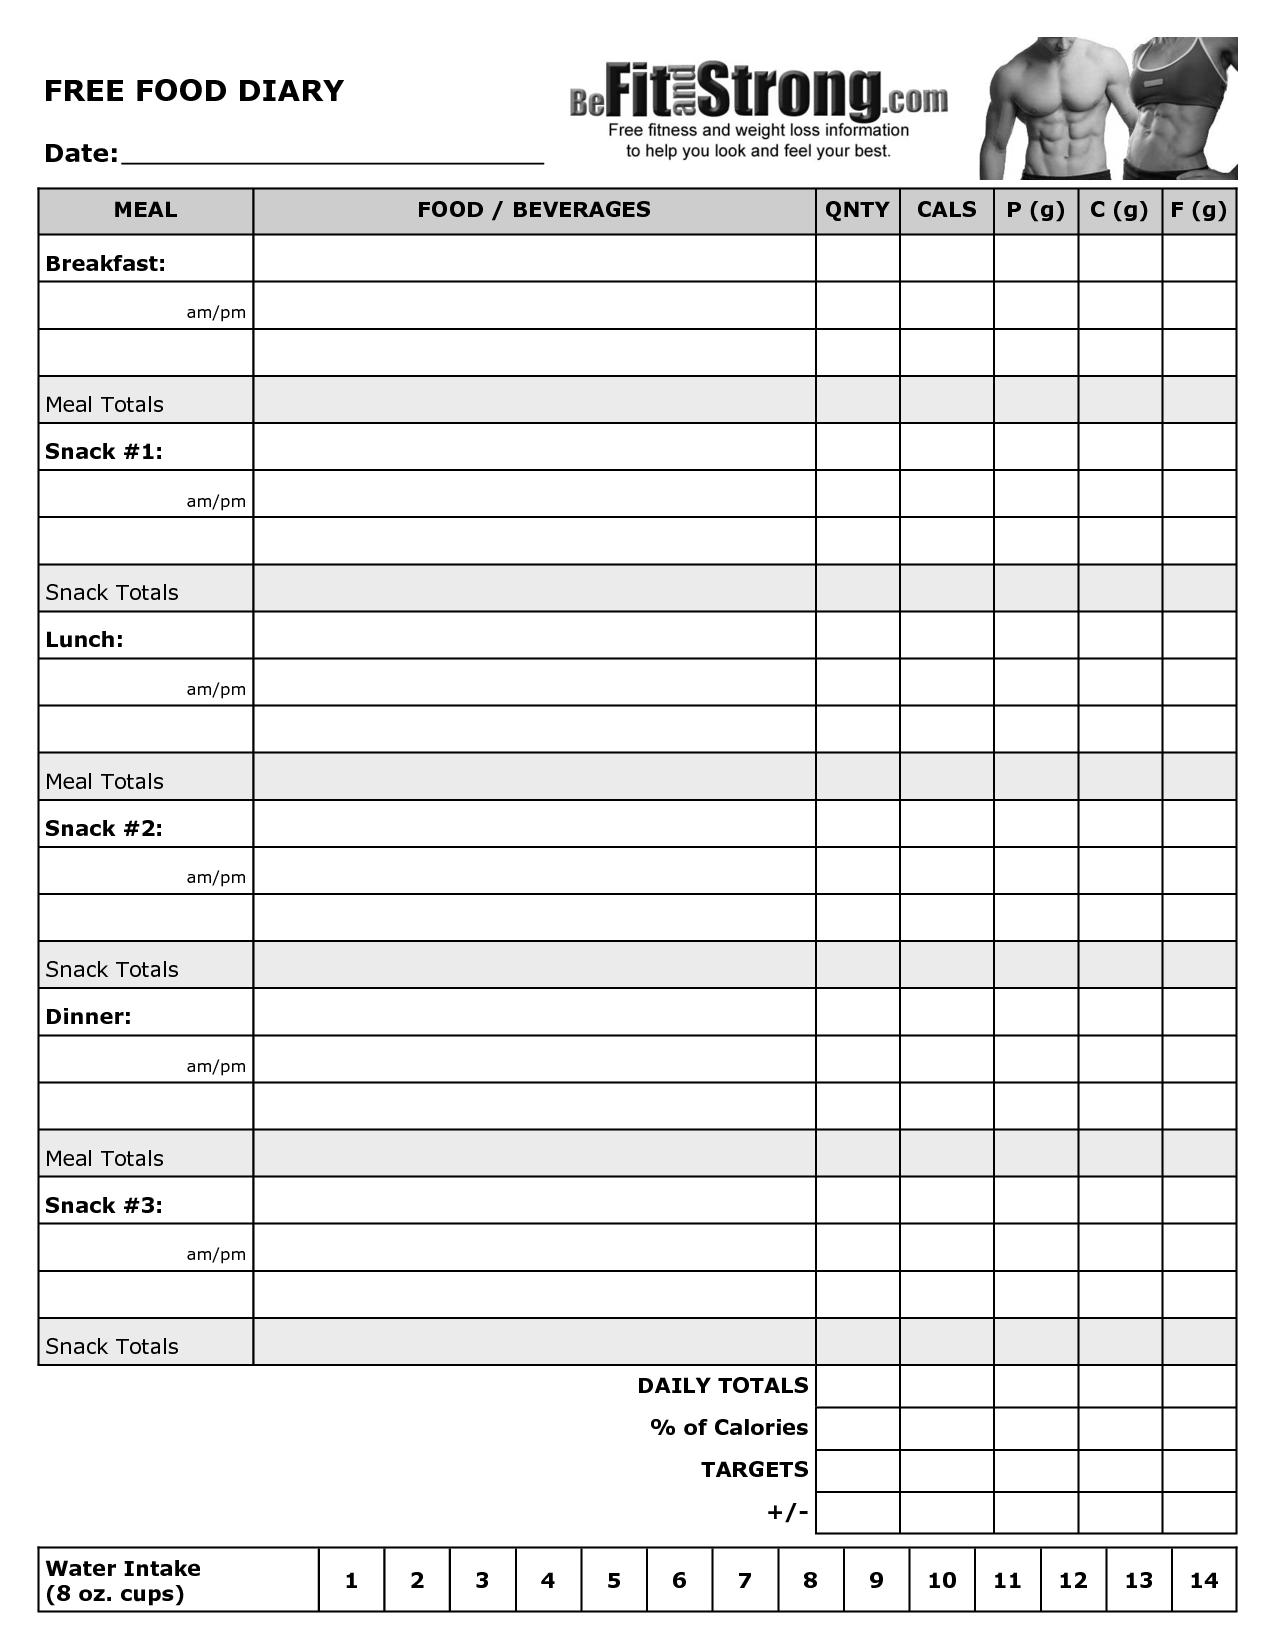 Free Printable Food Diary Template | Health, Fitness &amp;amp; Weight Loss - Free Printable Calorie Counter Journal